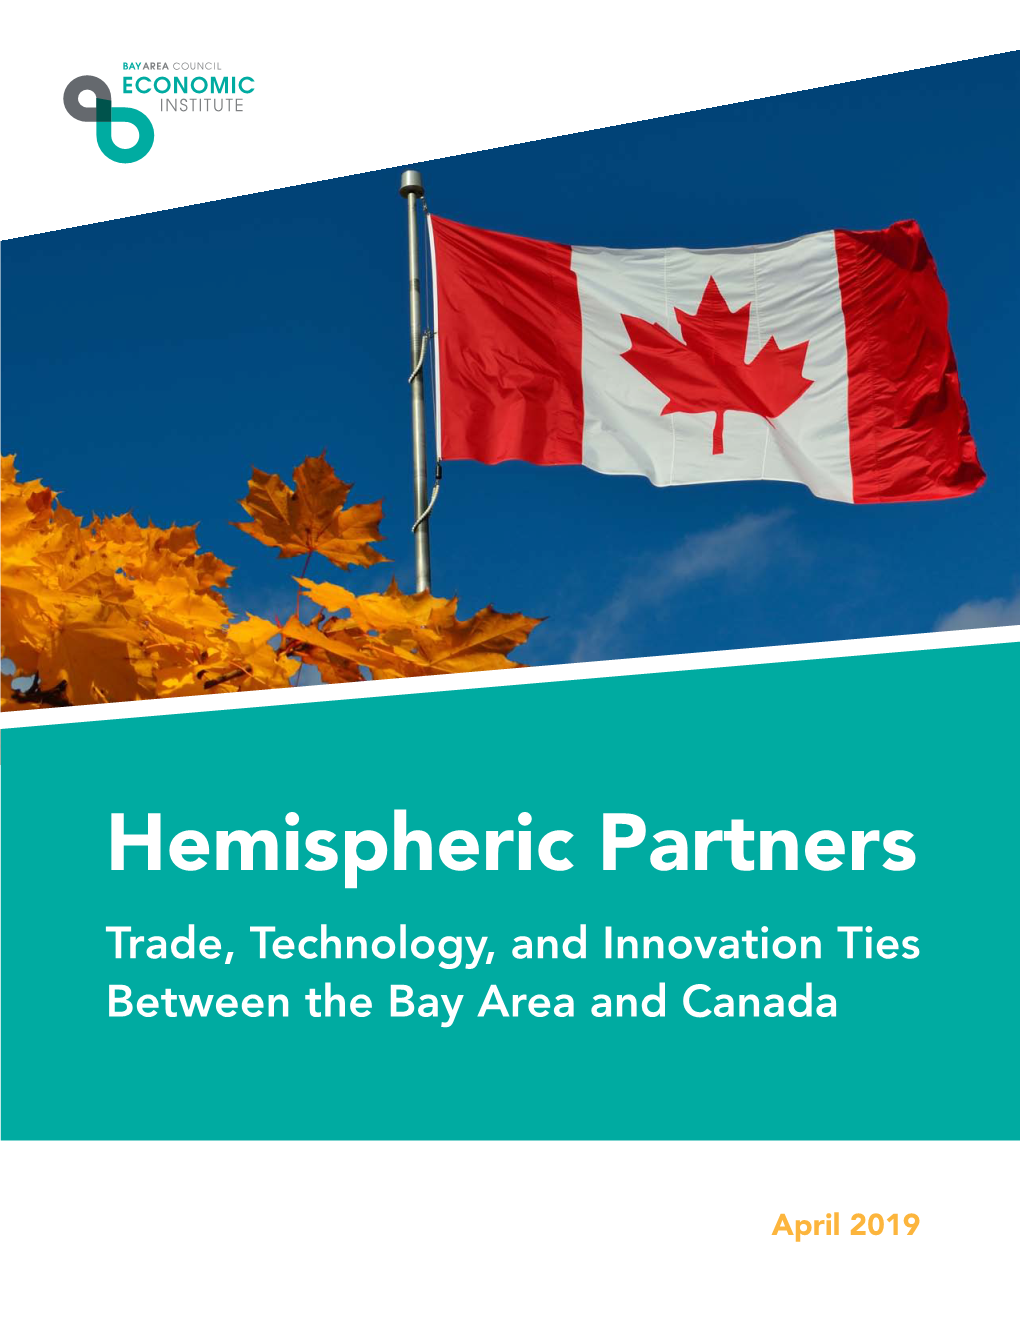 Hemispheric Partners Trade, Technology, and Innovation Ties Between the Bay Area and Canada